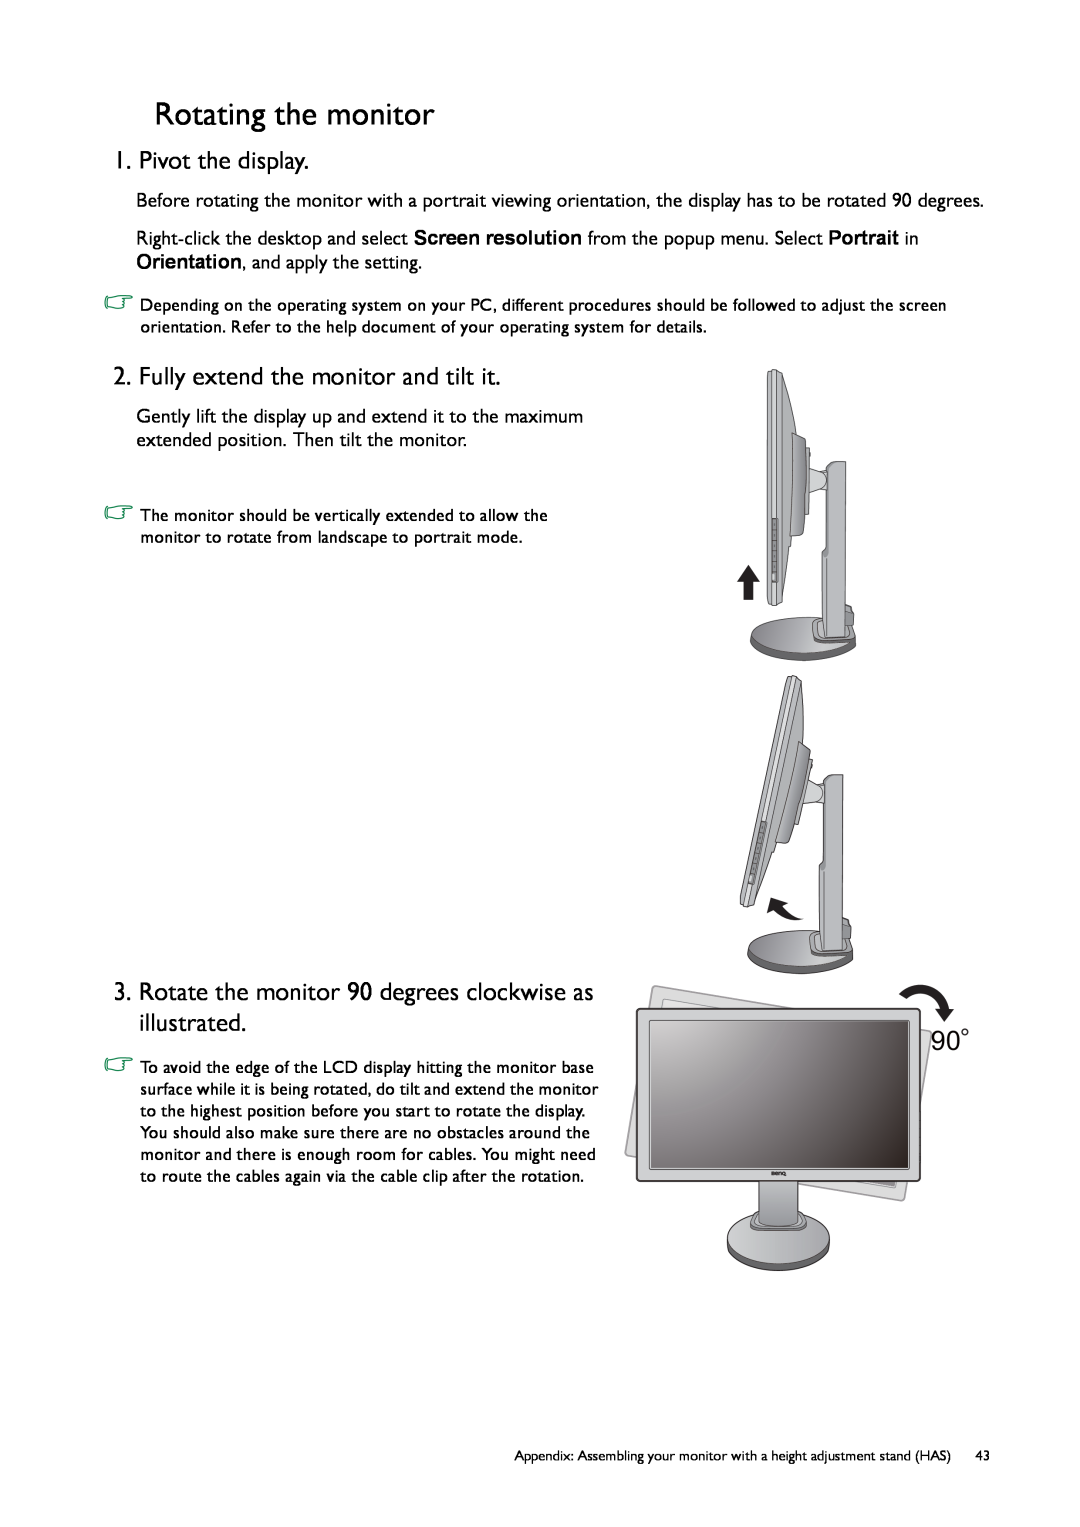 BenQ GL50, G50 user manual Rotating the monitor, Pivot the display, Fully extend the monitor and tilt it, illustrated 